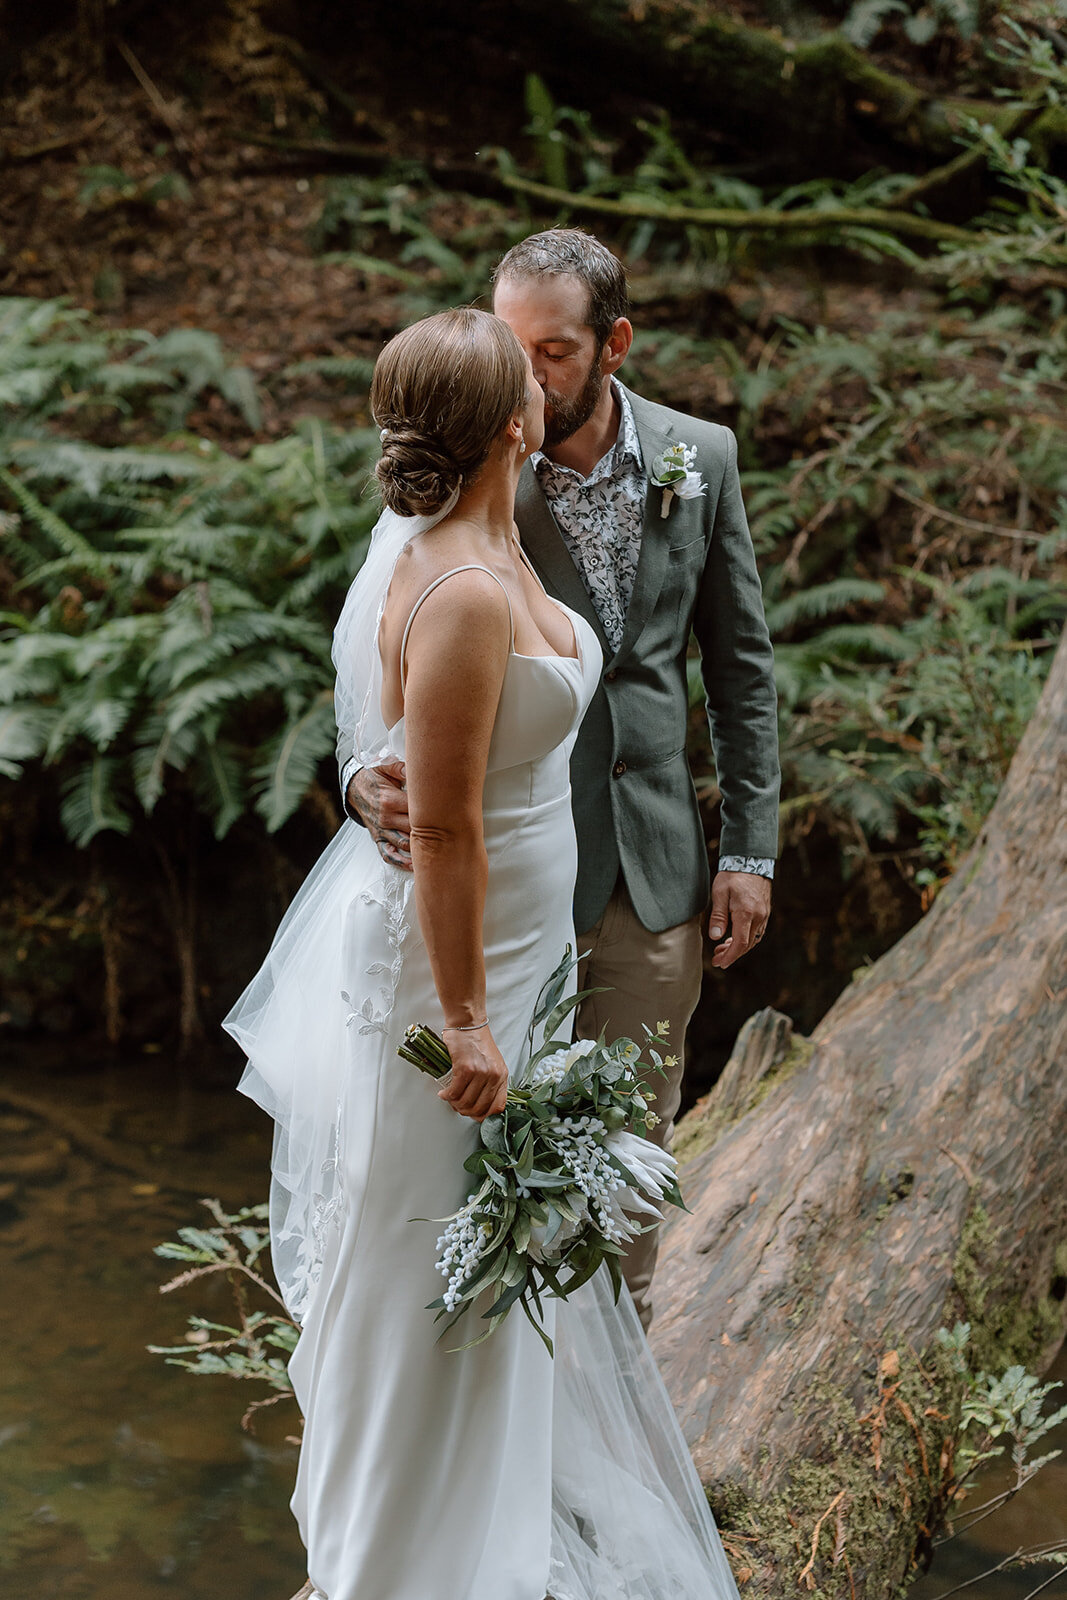 Stacey&Cory-Coast&Pines-389